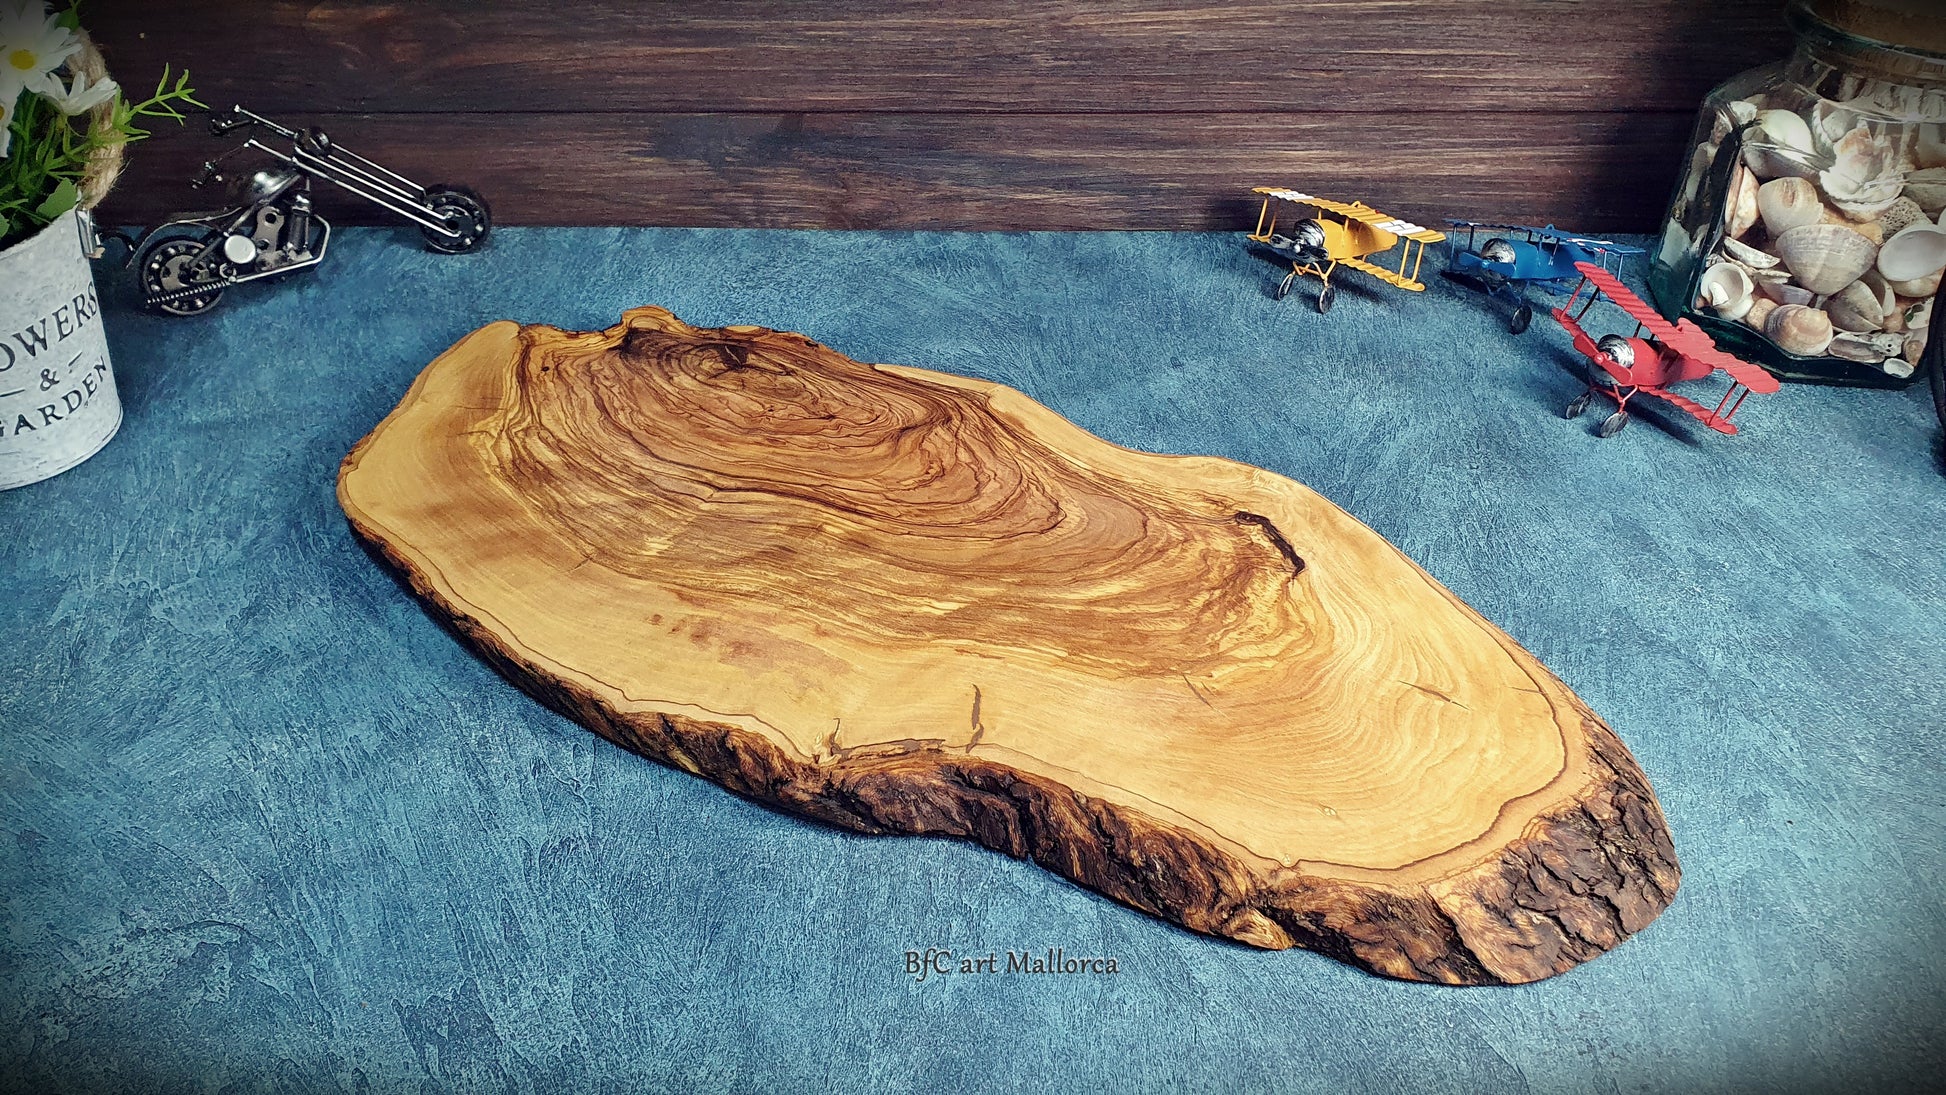 Natural Large Cutting Board, Rustic Olive Wood Cutting Board, Rustic C –  BfC Art Mallorca